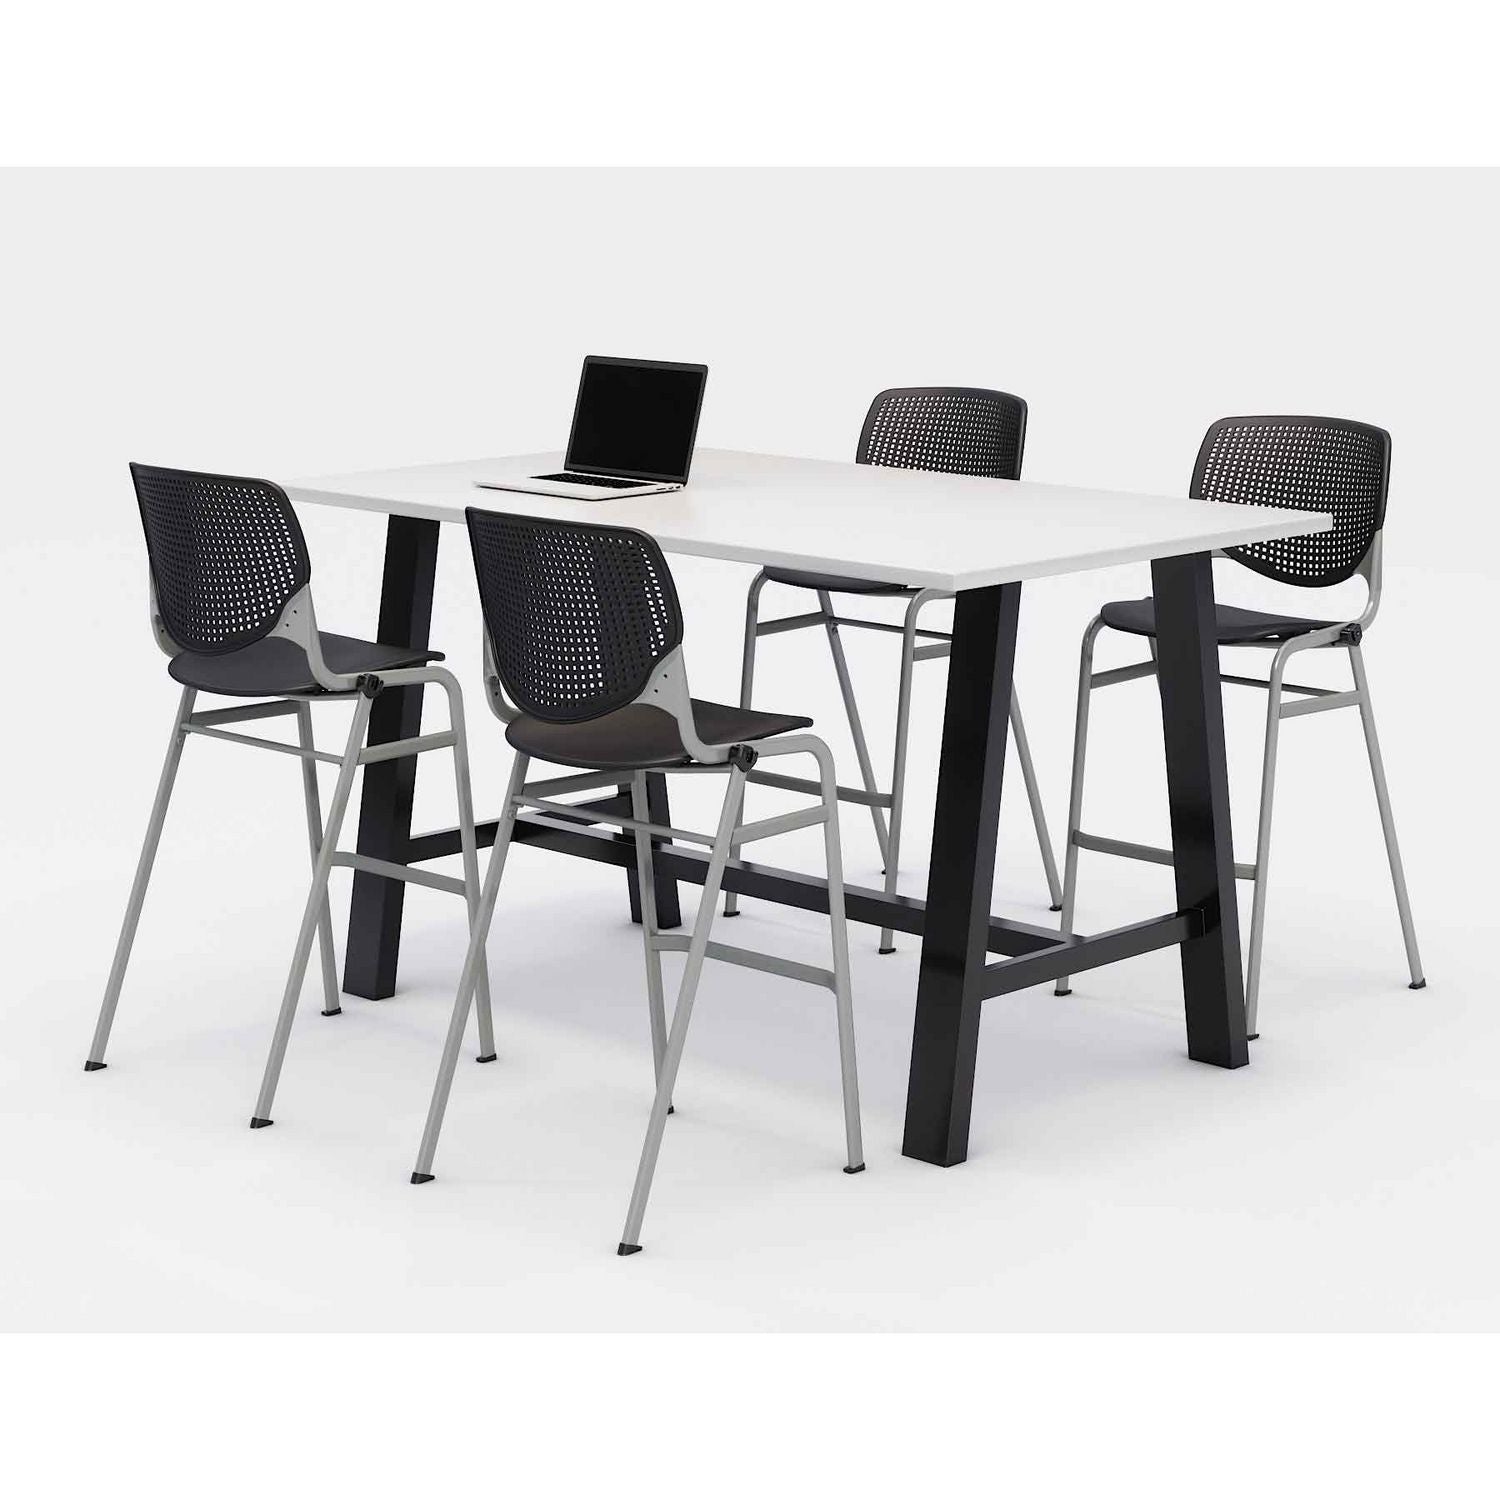 midtown-bistro-dining-table-with-four-black-kool-barstools-36-x-72-x-41-designer-white-ships-in-4-6-business-days_kfi840031900579 - 1